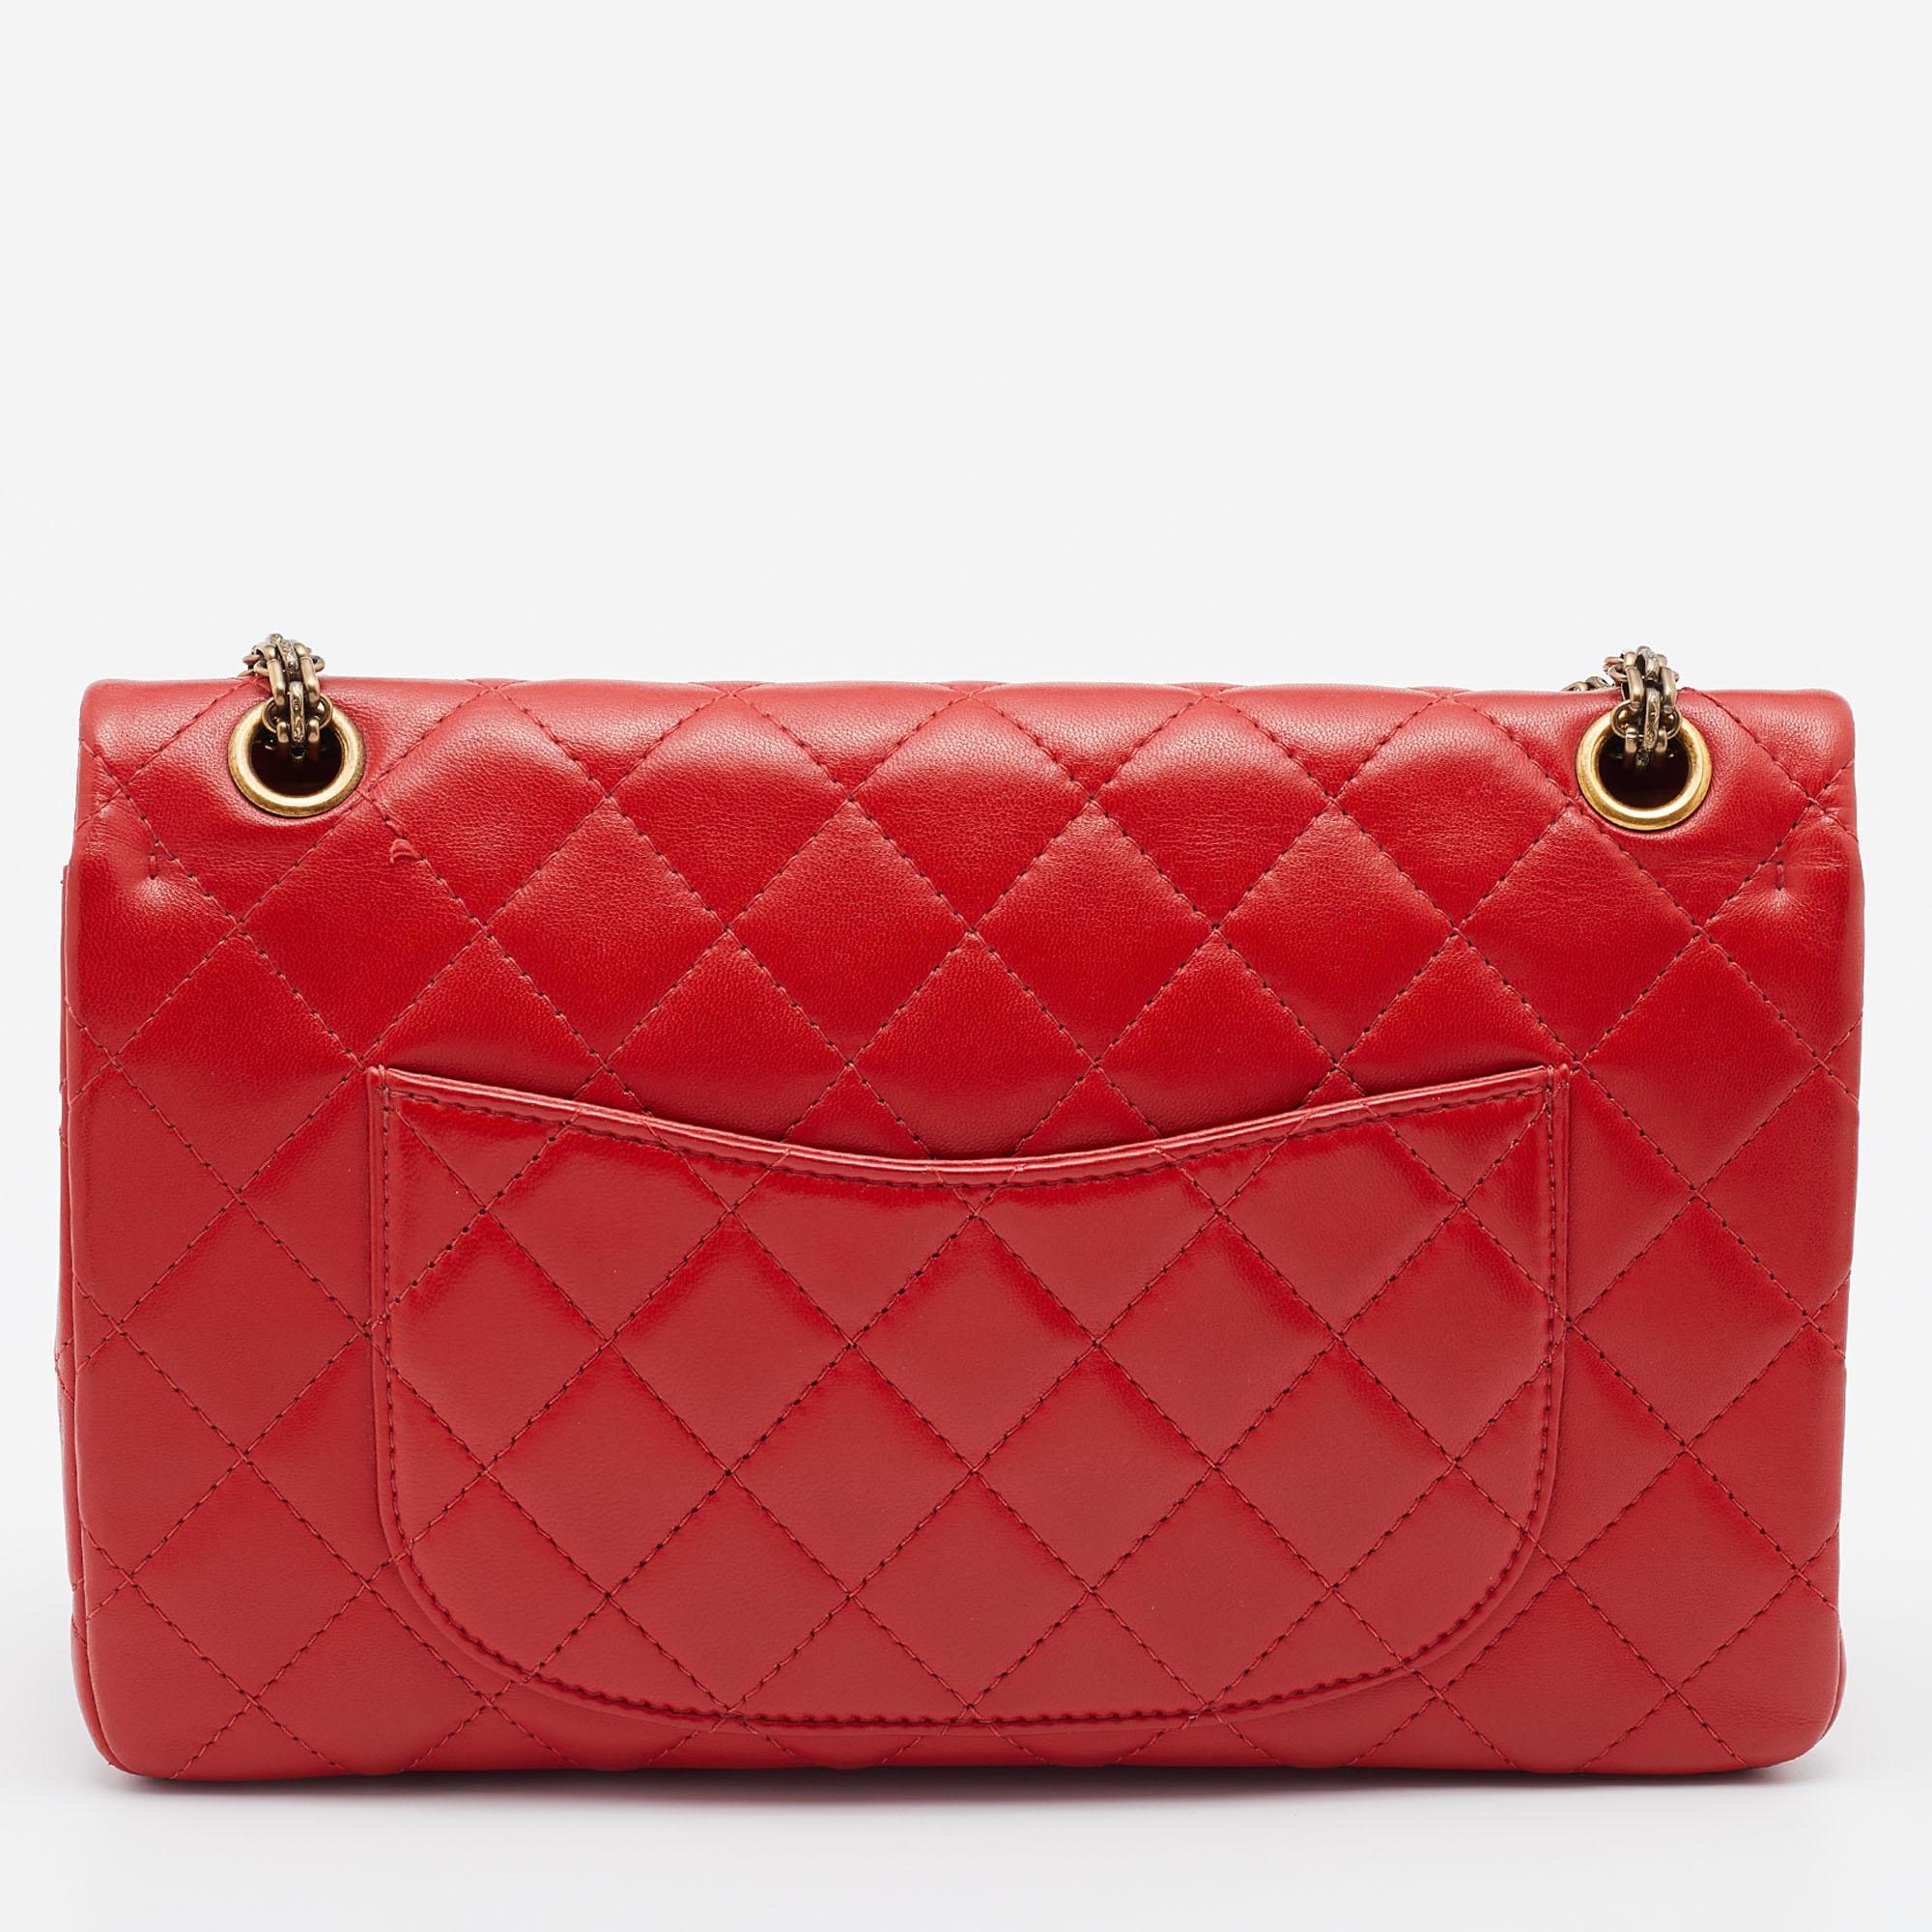 The house of Chanel offers this beautiful Reissue 2.55 Classic 226 Flap bag to help you create timeless style edits every season. Crafted using quilted leather, this piece will last you a long time.

Includes: Original Dustbag

